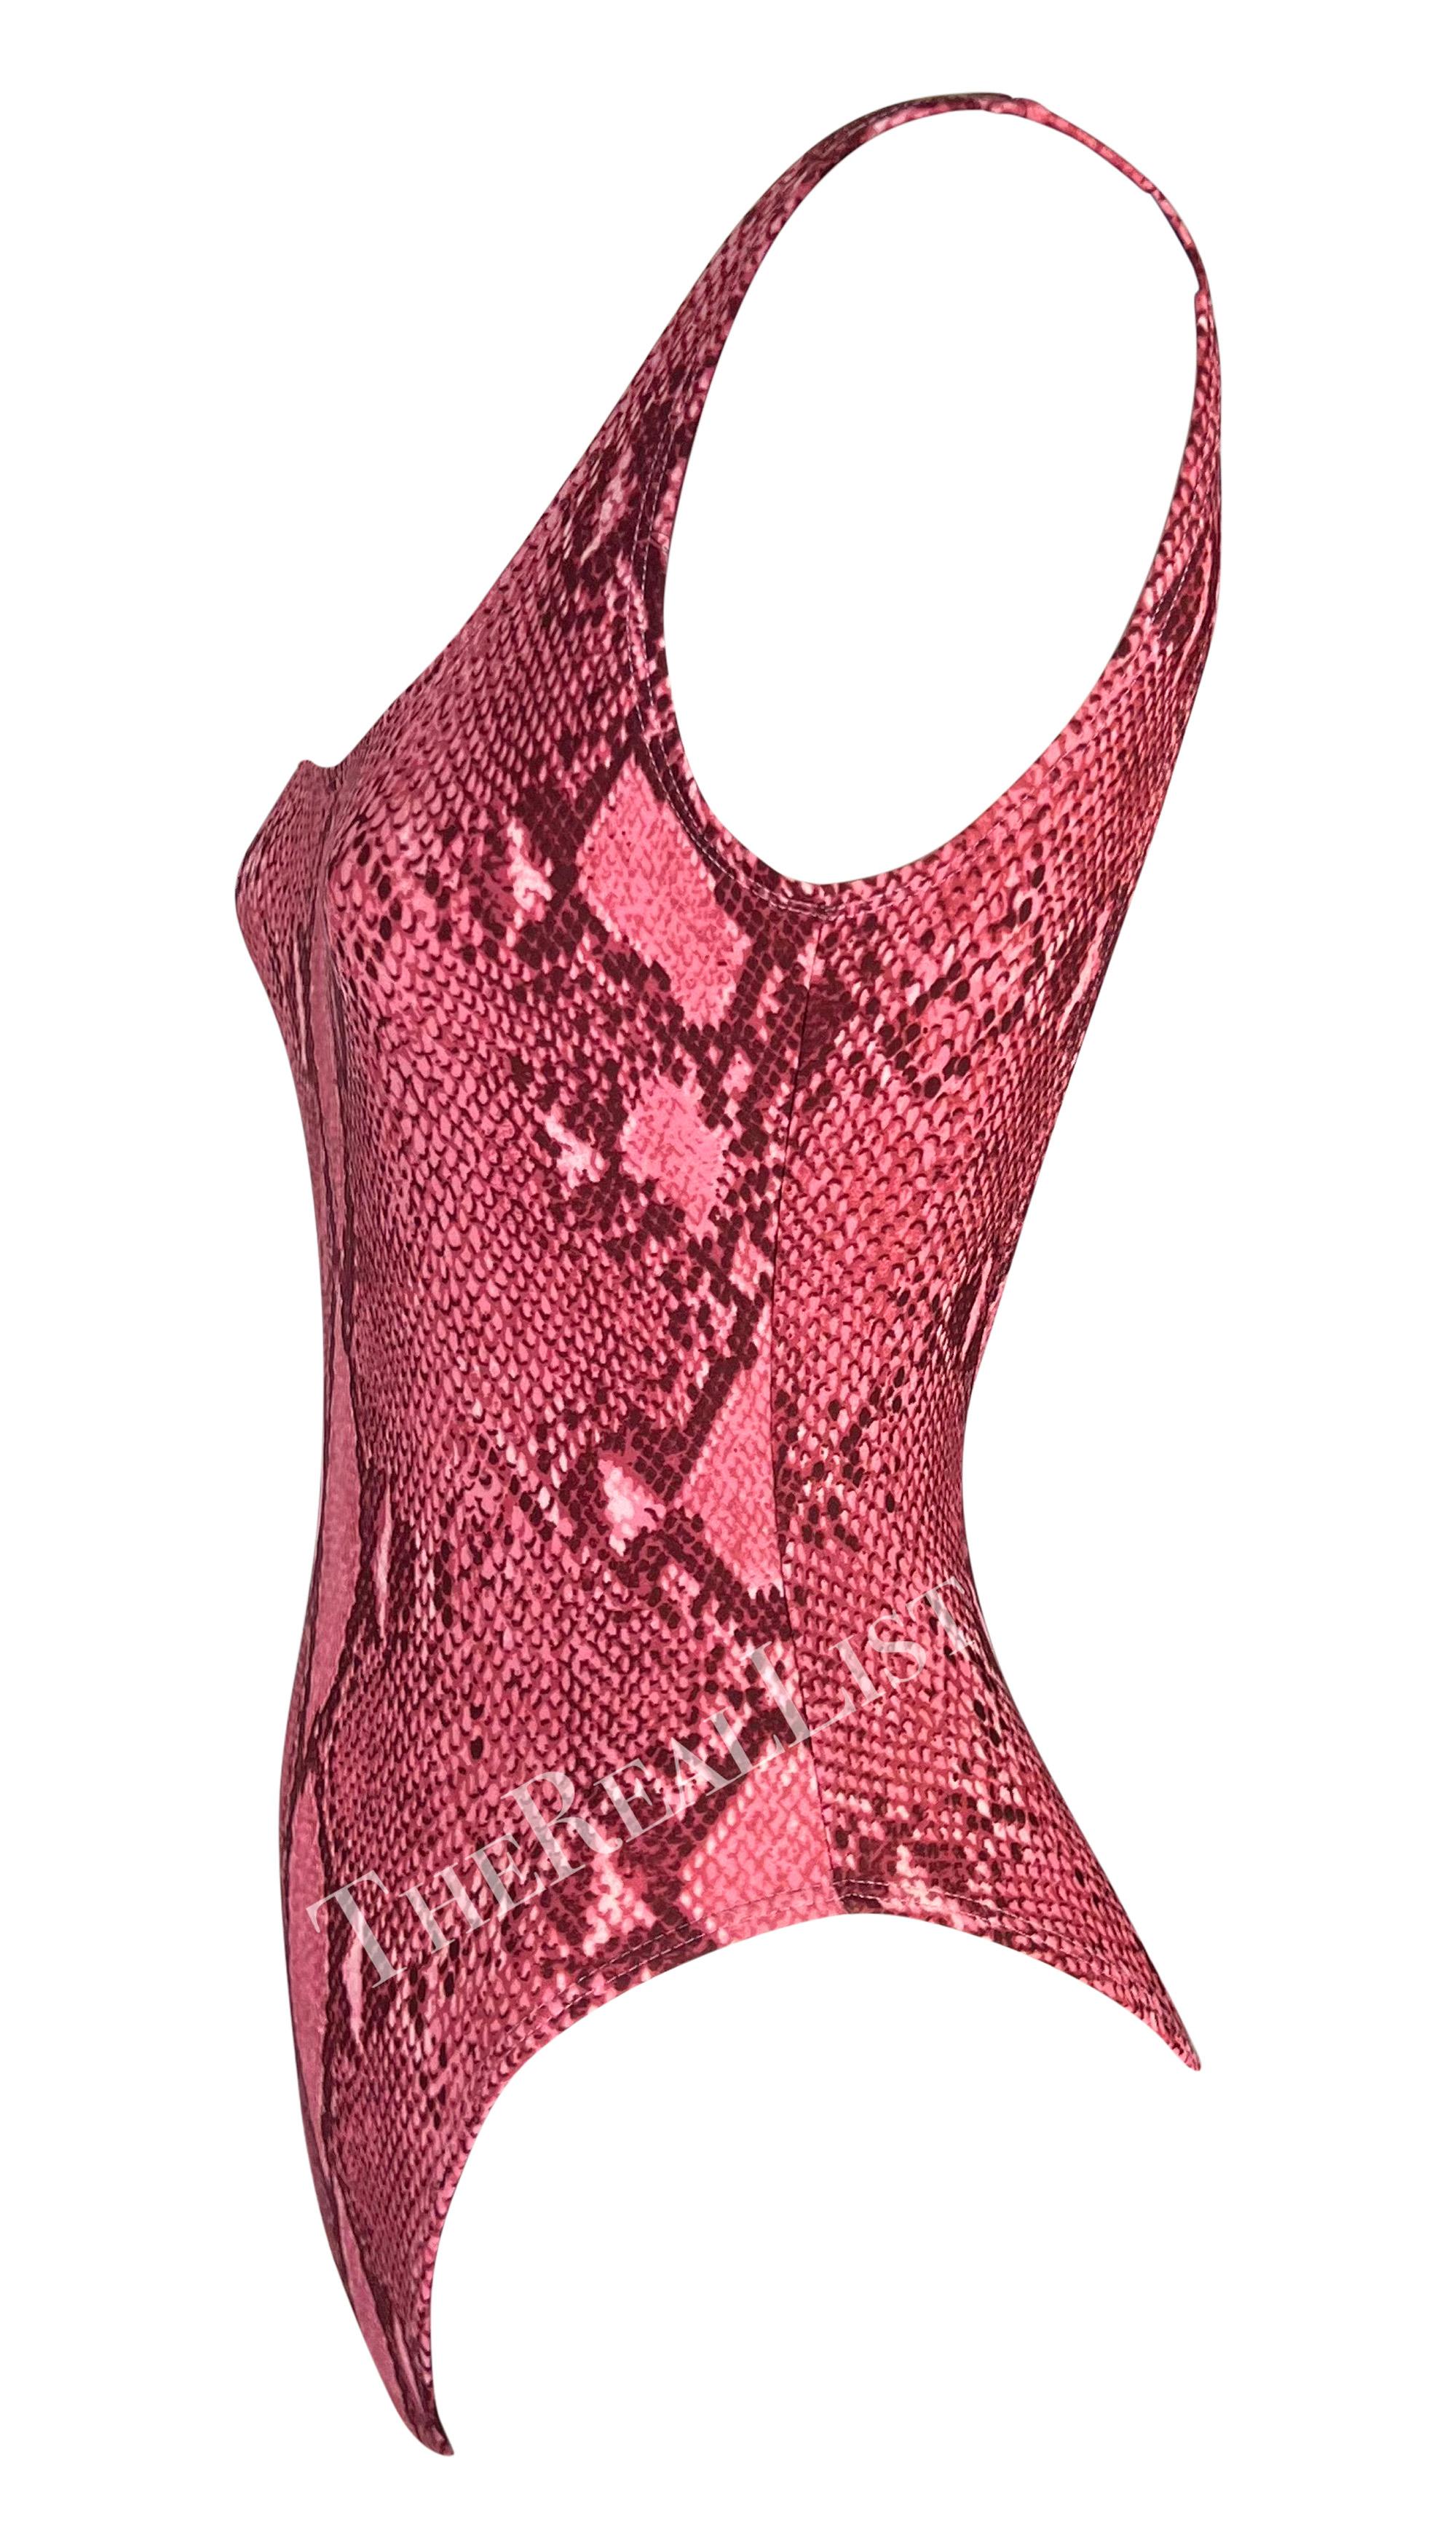 S/S 2000 Gucci by Tom Ford Pink Snakeskin Print One Piece Swimsuit Bodysuit In Excellent Condition For Sale In West Hollywood, CA